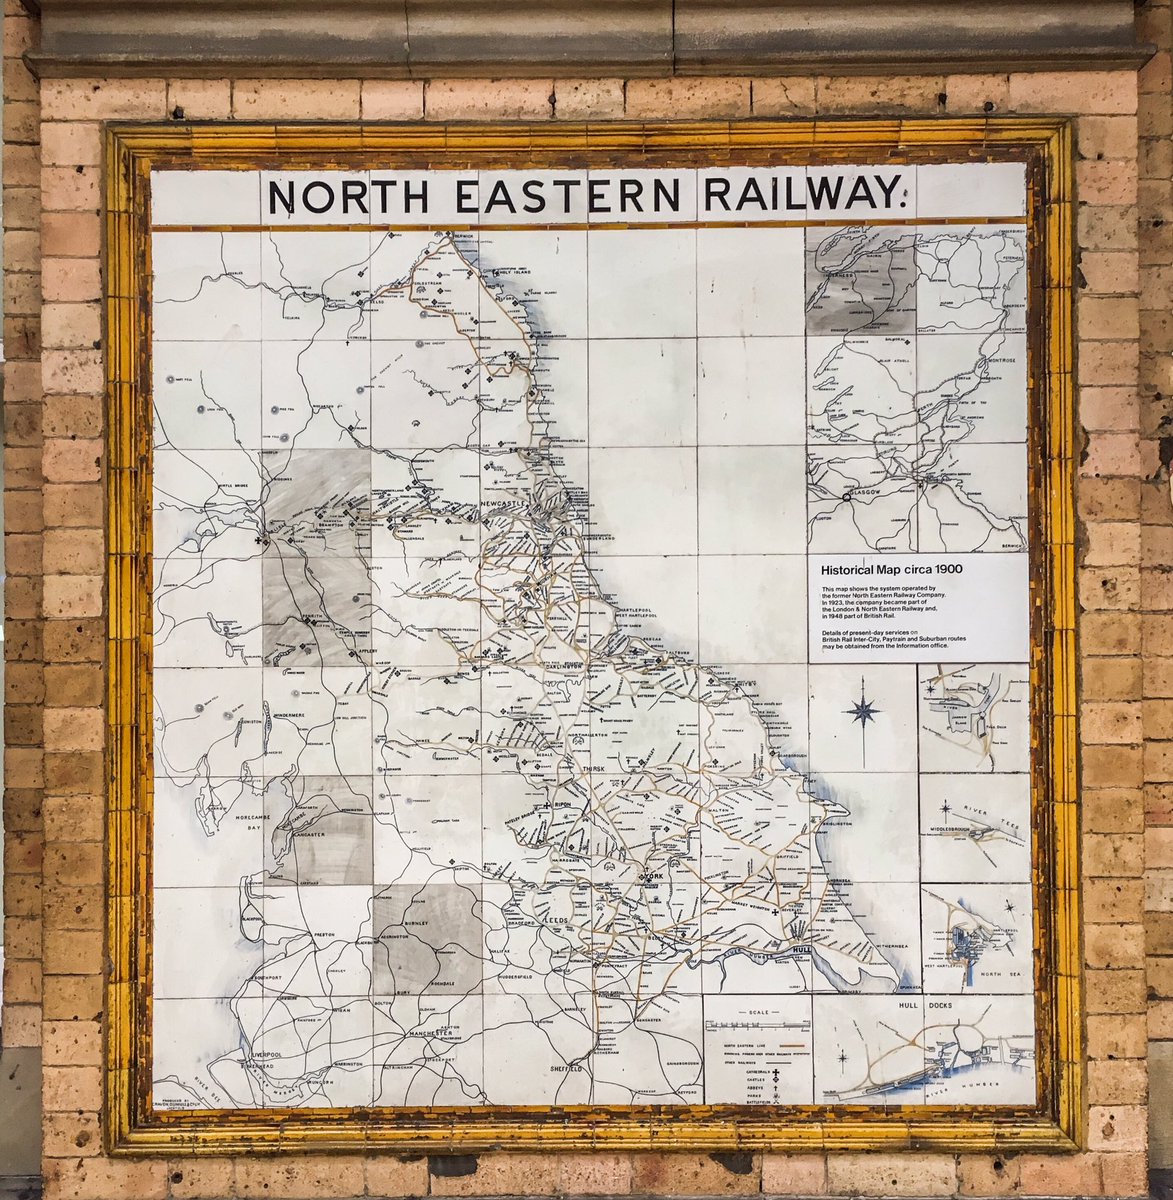 At York station is this original North Eastern Rly glazed tiled map, with lines now lost & extant. It includes info that passengers of c.1900 were thought to be interested in such as running rights, parks & battlefields. 11 similar original NER maps still exist elsewhere today...